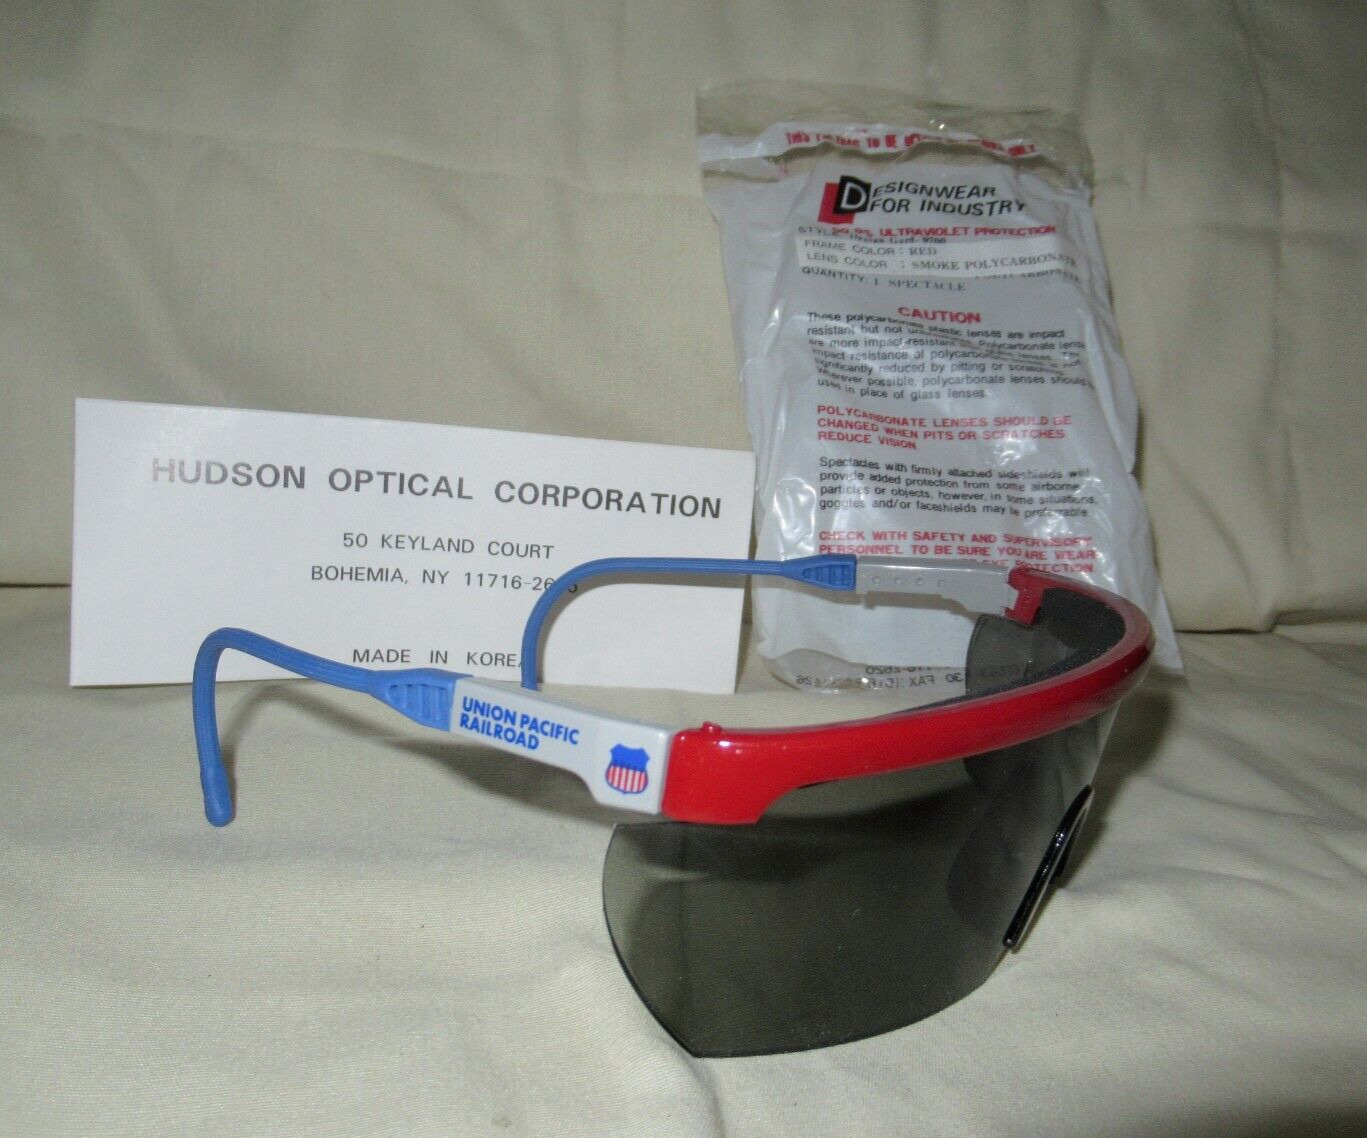 UNION PACIFIC RAILROAD SAFETY SUNGLASSES Z87 SMOKE LENS HUDSON OPTICAL NEW COND